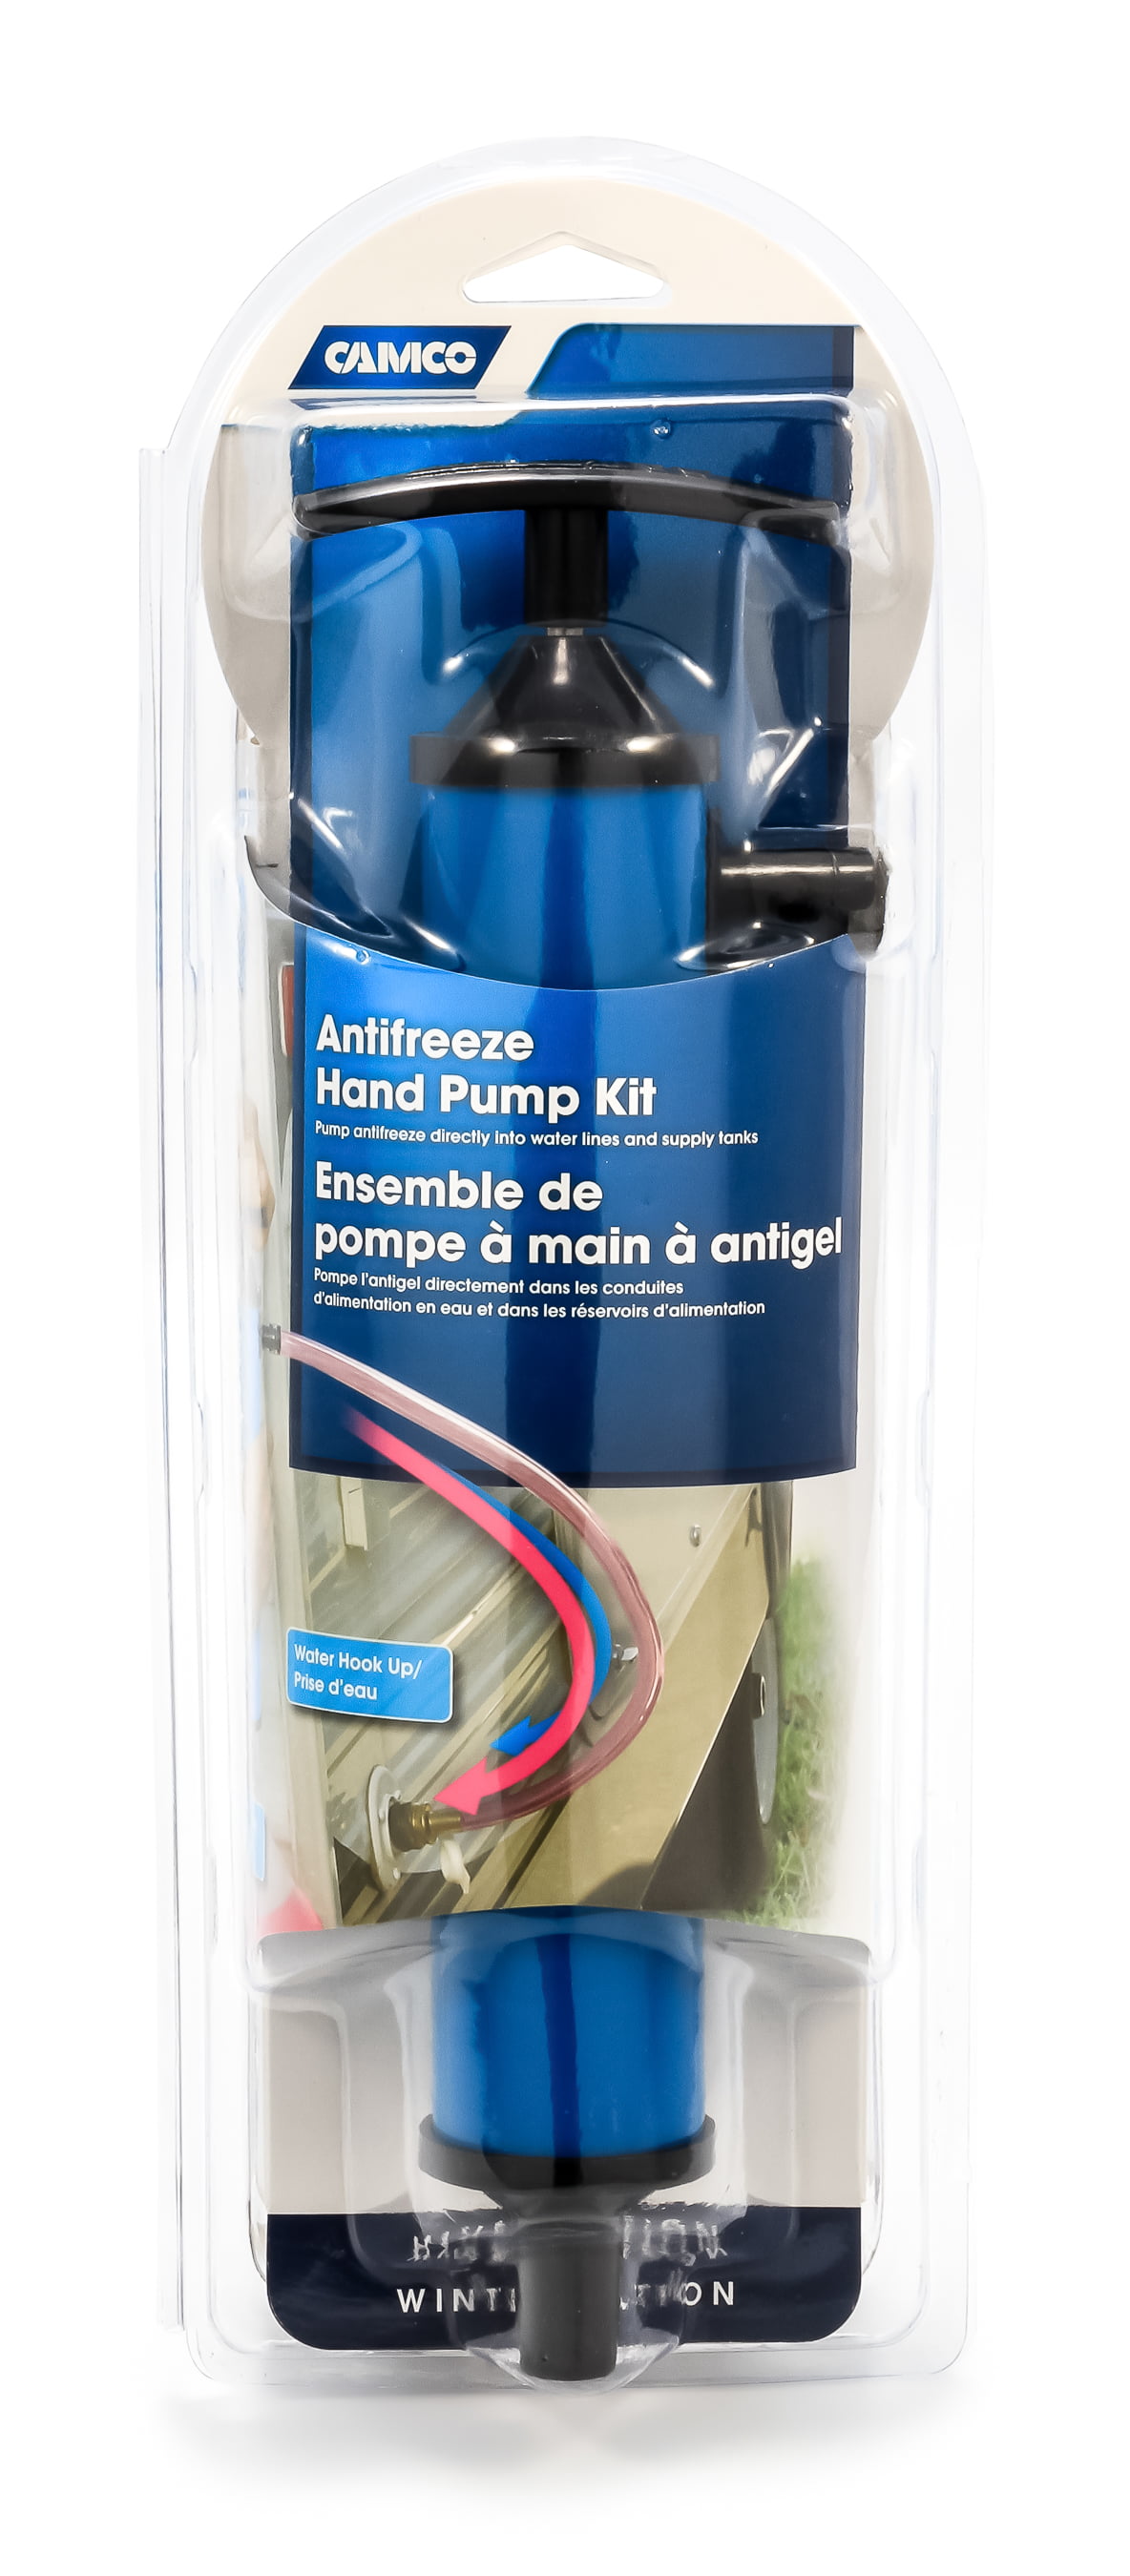 Camco Antifreeze Hand Pump Kit- Pumps Antifreeze Directly Into the RV Water...